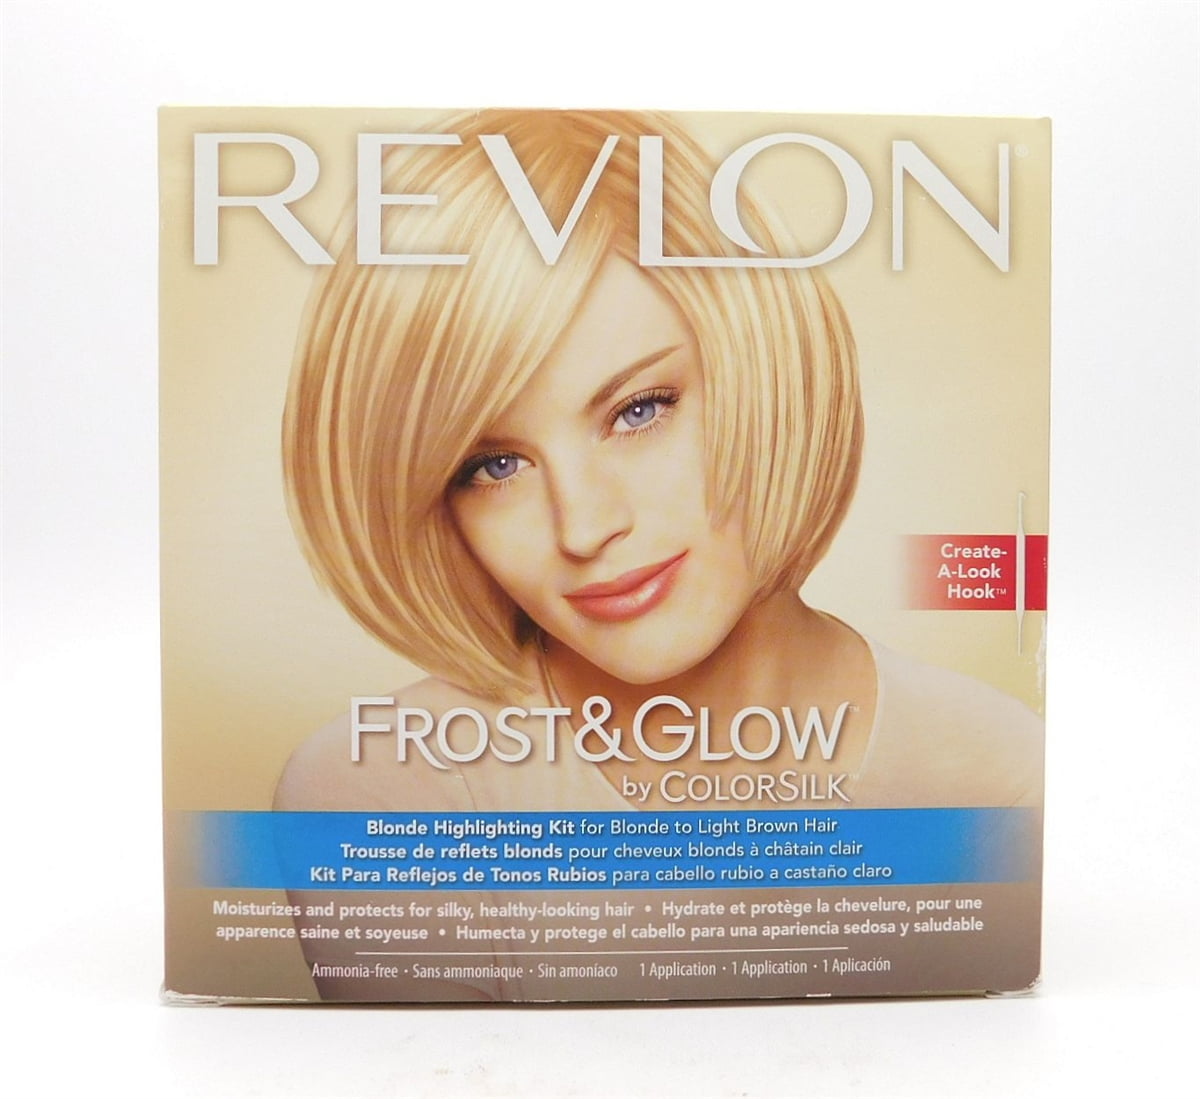 Revlon Frost Glow By Colorsilk Blonde Highlighting Kit For Blonde To Light Brown Hair